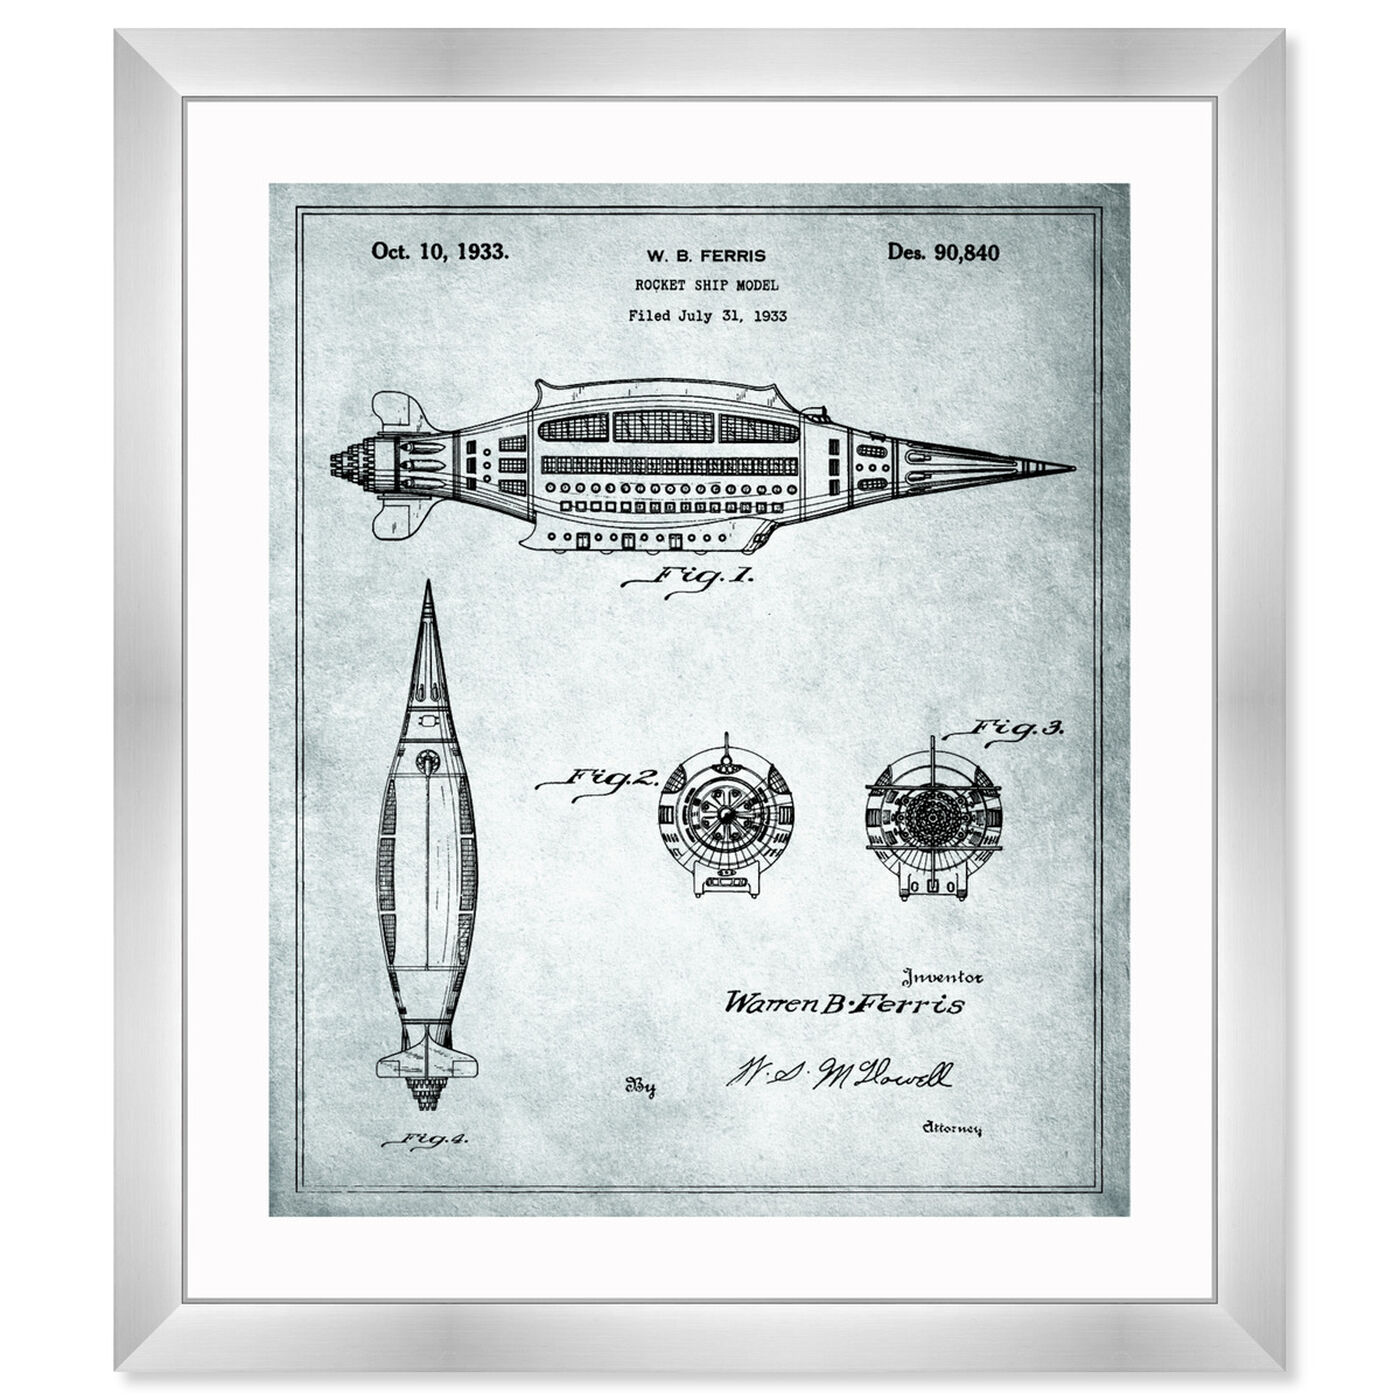 Front view of Design for a Rocket Ship Model 1933 featuring transportation and air transportation art.